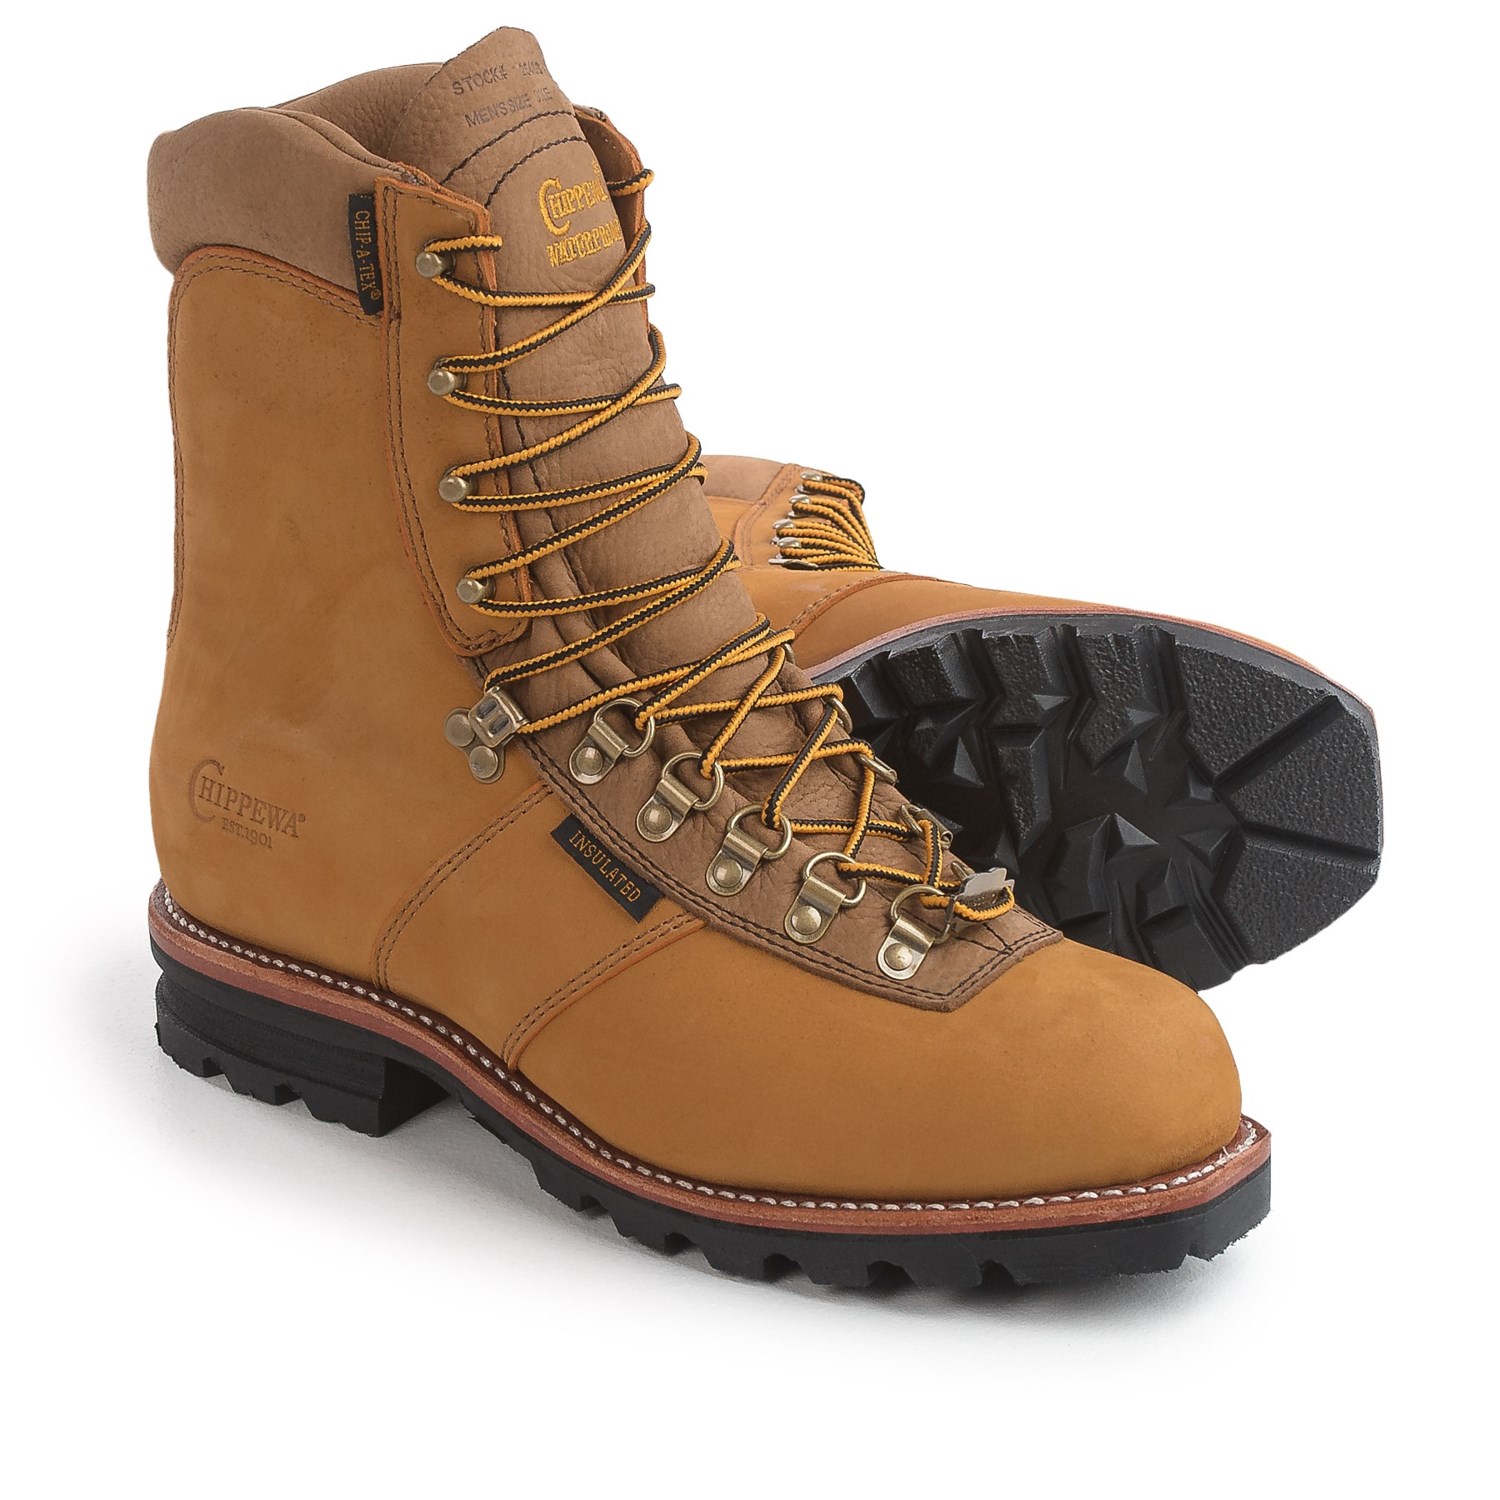 Chippewa Arctic Rugged Leather Work Boots – Waterproof, Insulated, 9 ...